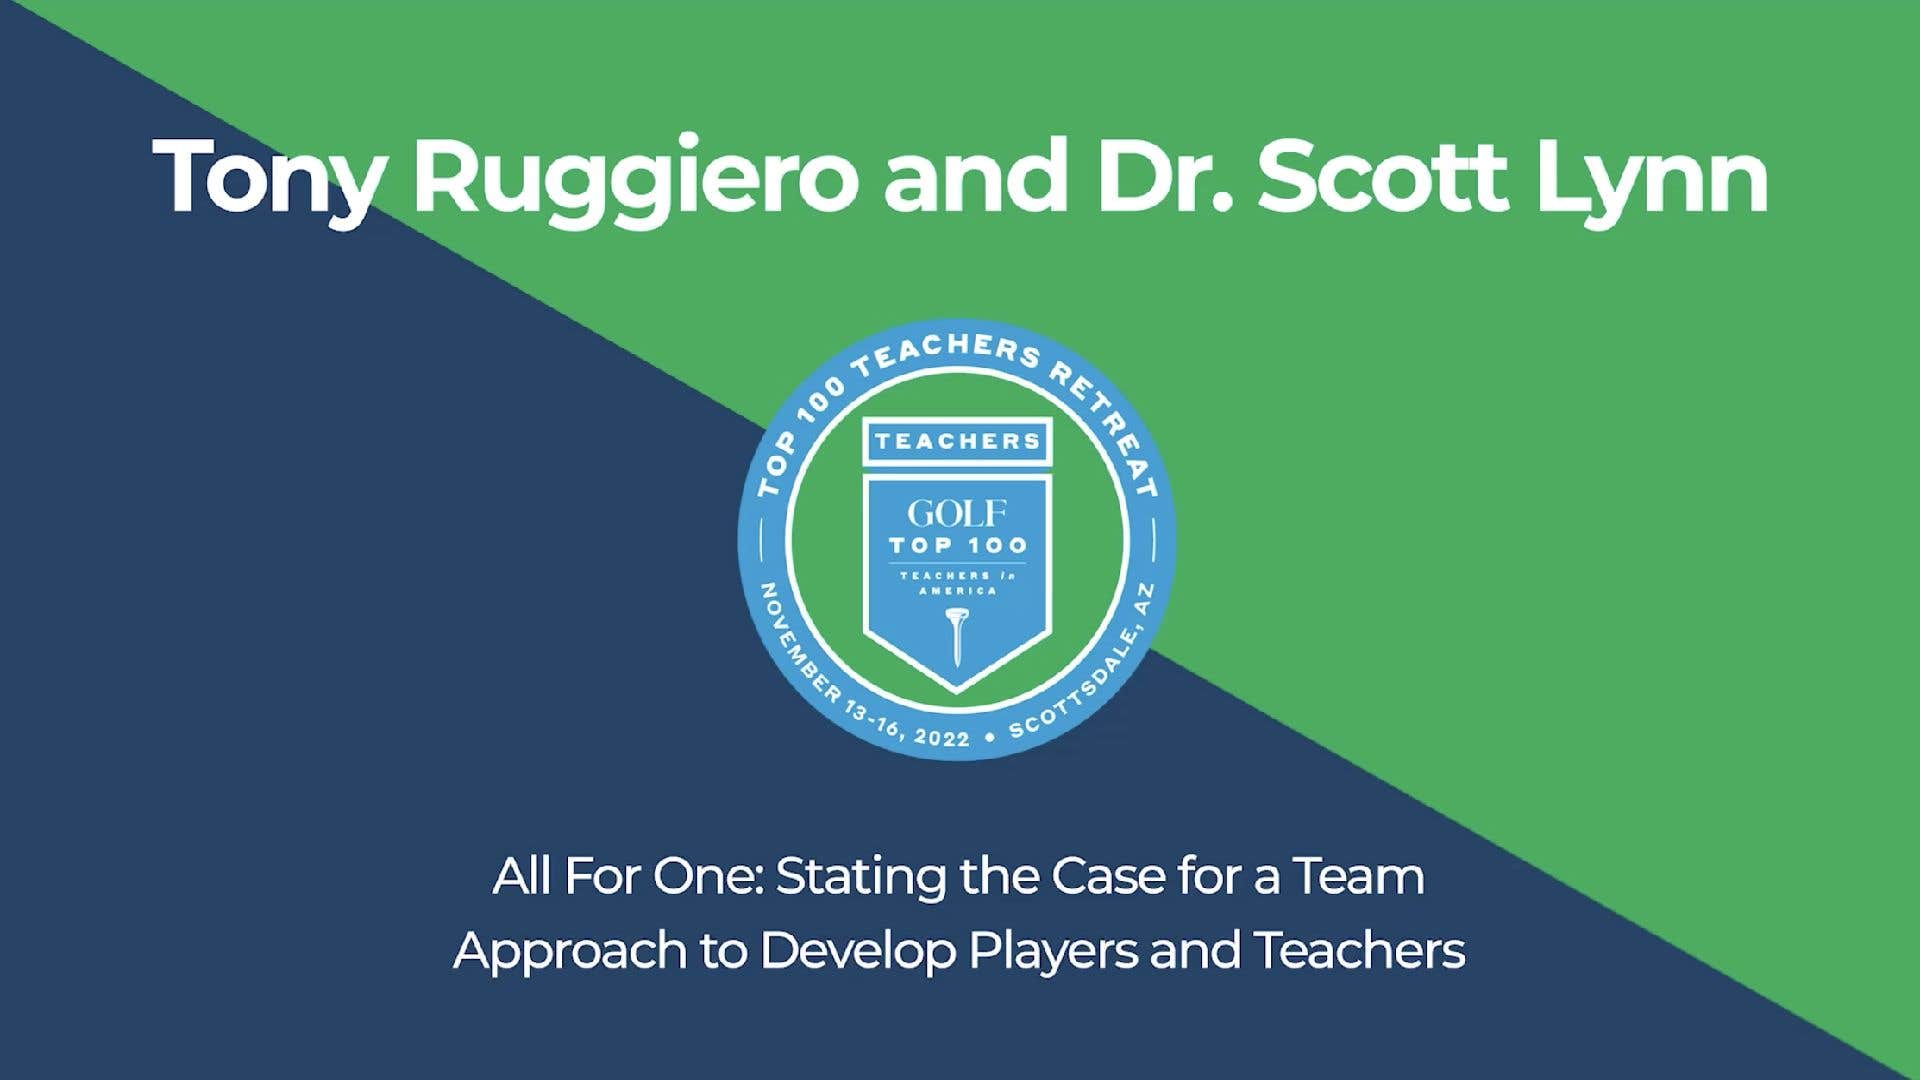 InsideGOLF Exclusive: Tony Ruggiero and Dr. Scott Lynn state their case for using a team approach in development